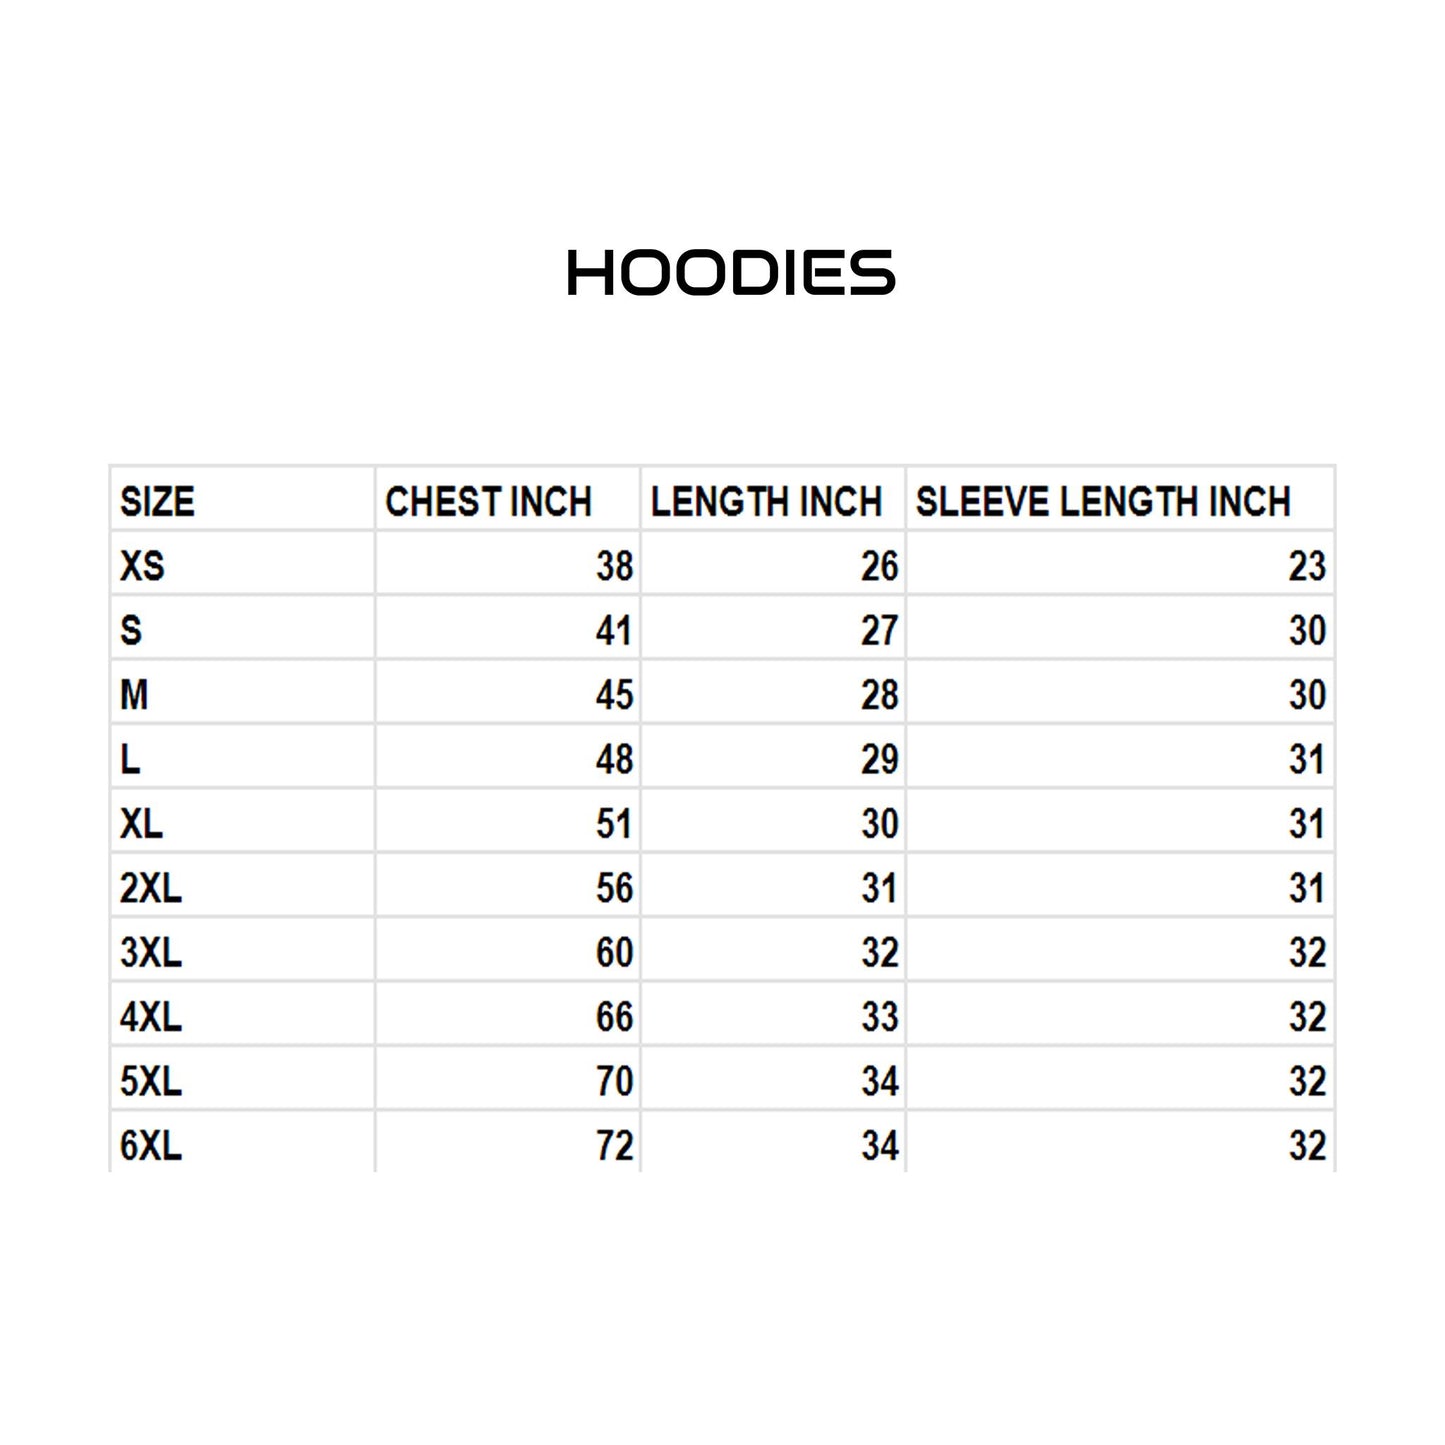 LIMITED EDITION-OLD SCHOOL FRIENDS HOODIES